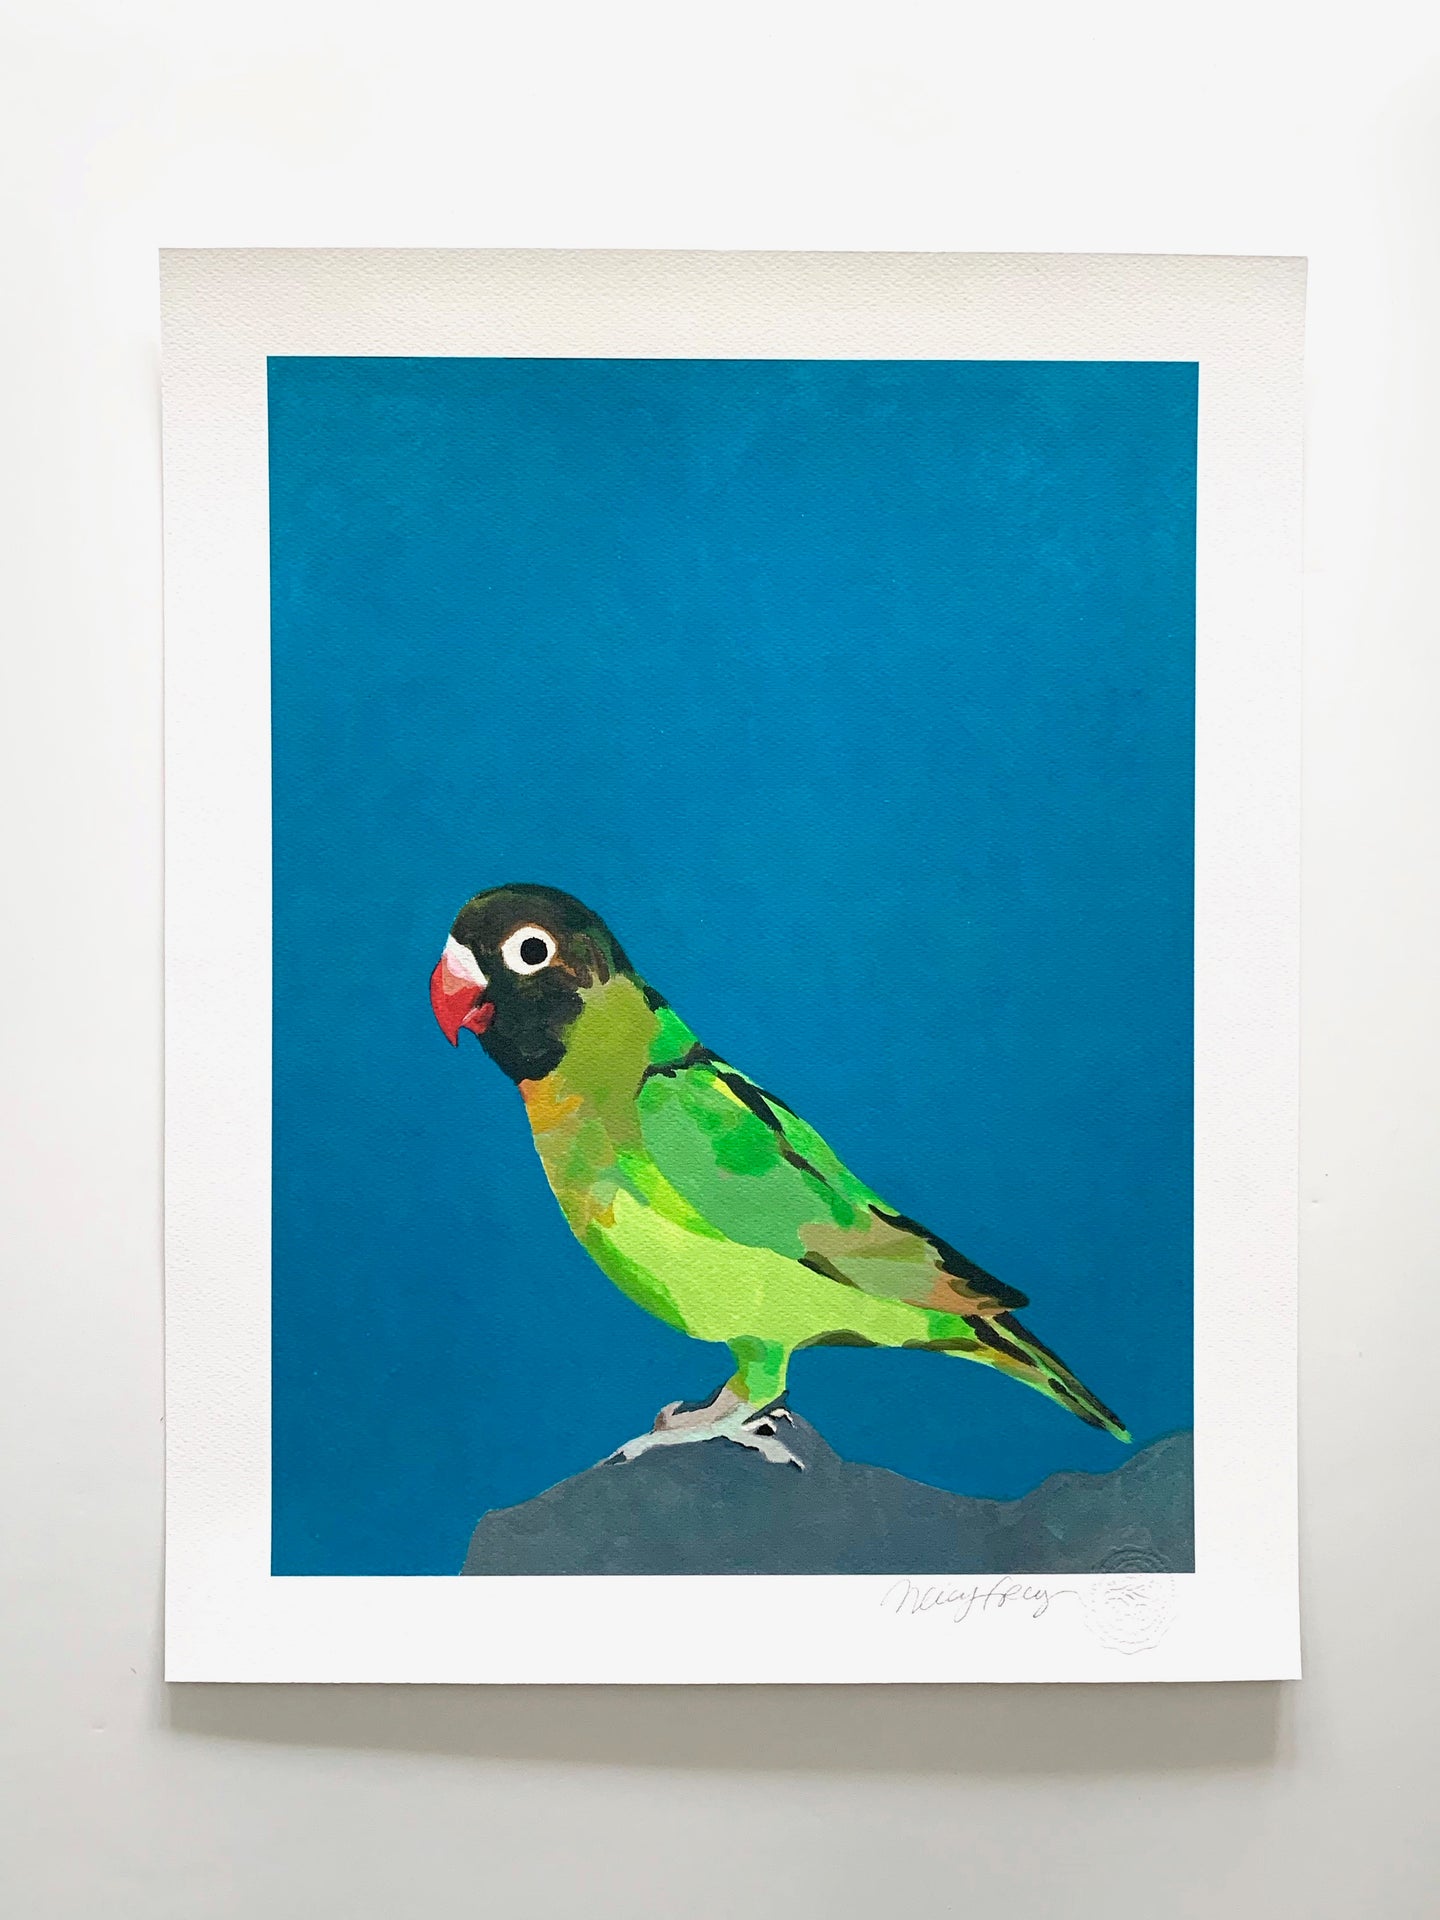 Cher Green Parrot Giclee on paper 9